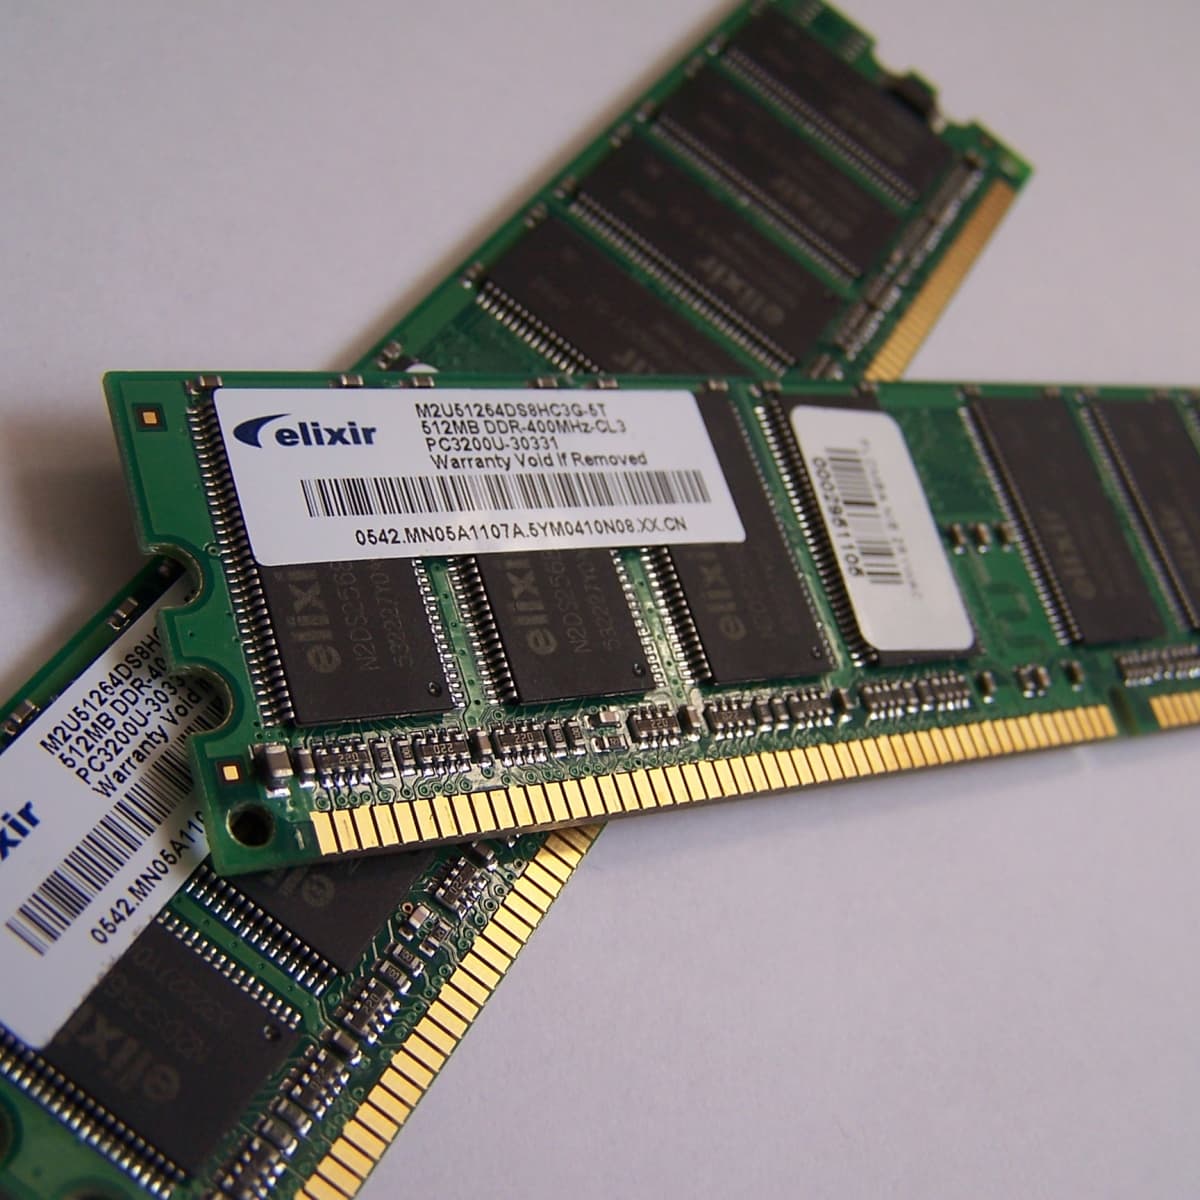 Adding More Memory or RAM Is the Most Cost Effective Upgrade Increase Performance - TurboFuture